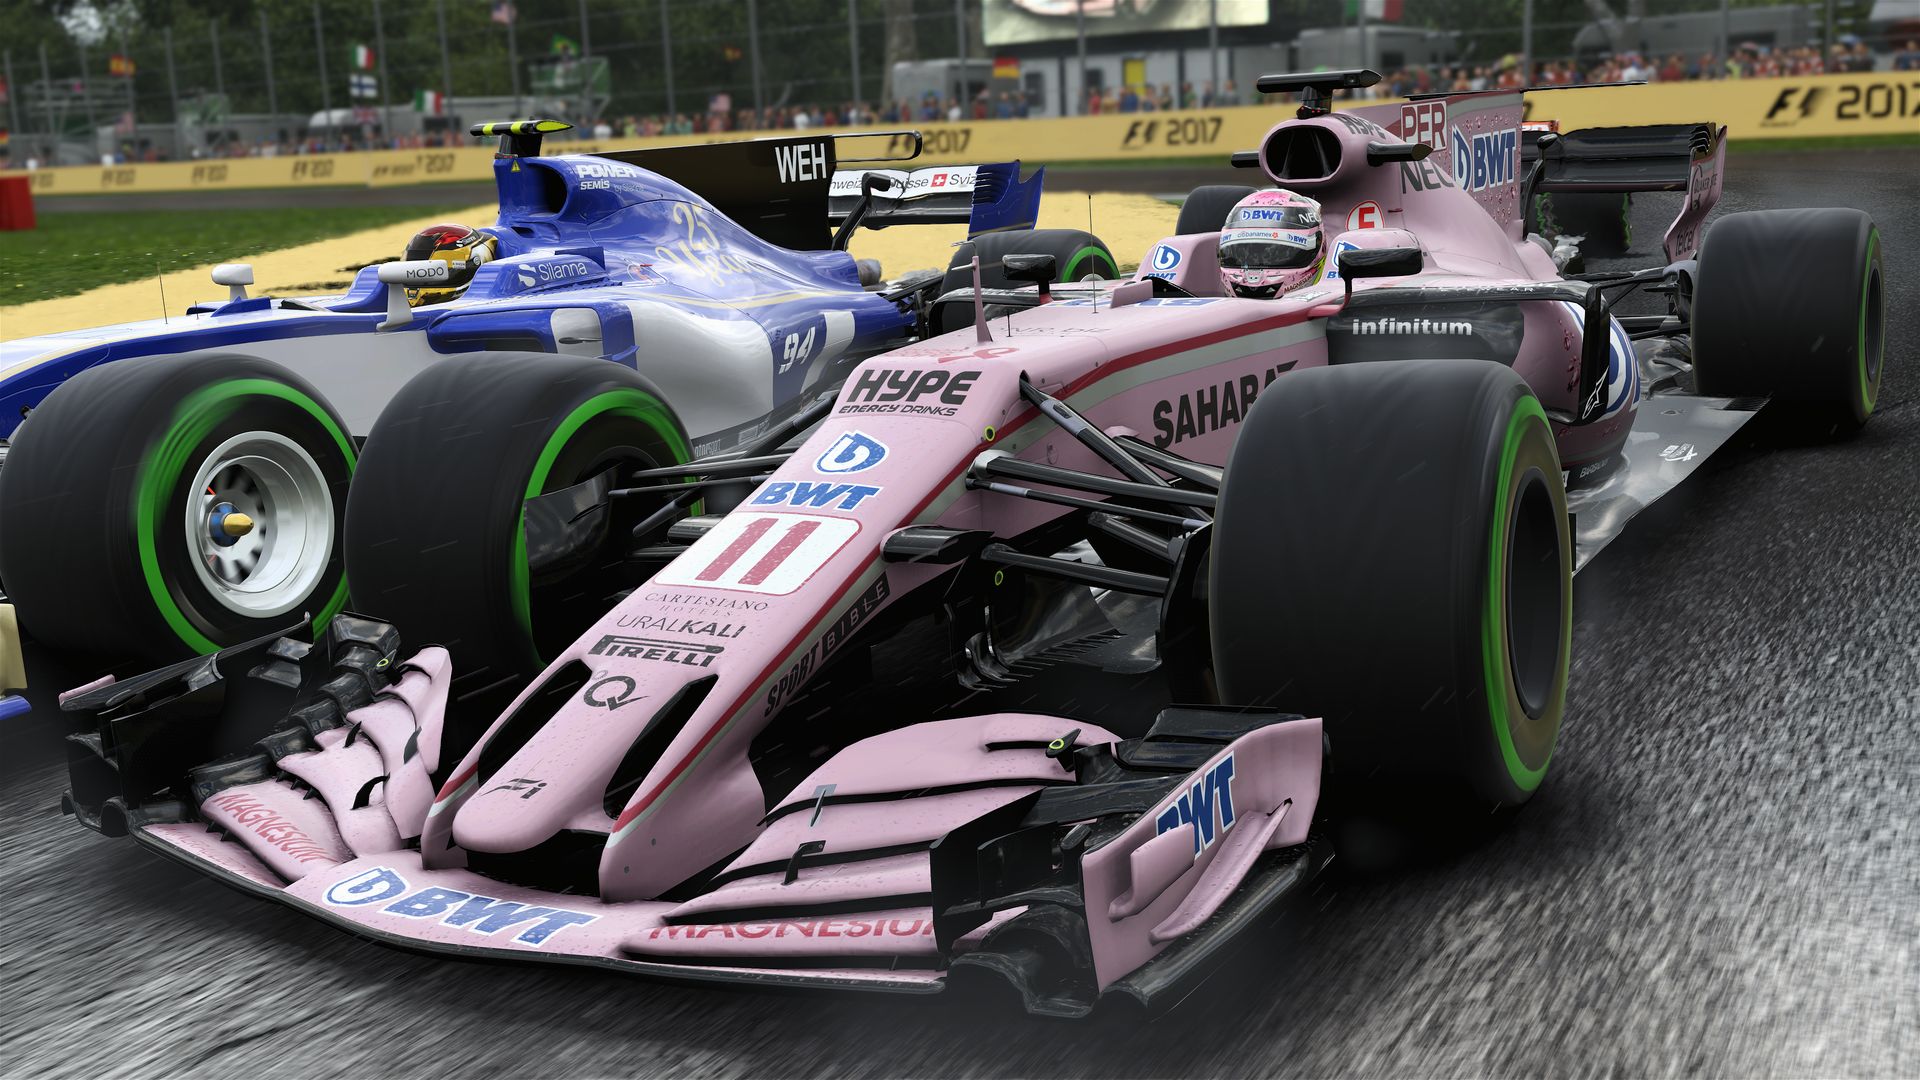 Find the best computers for F1 2017